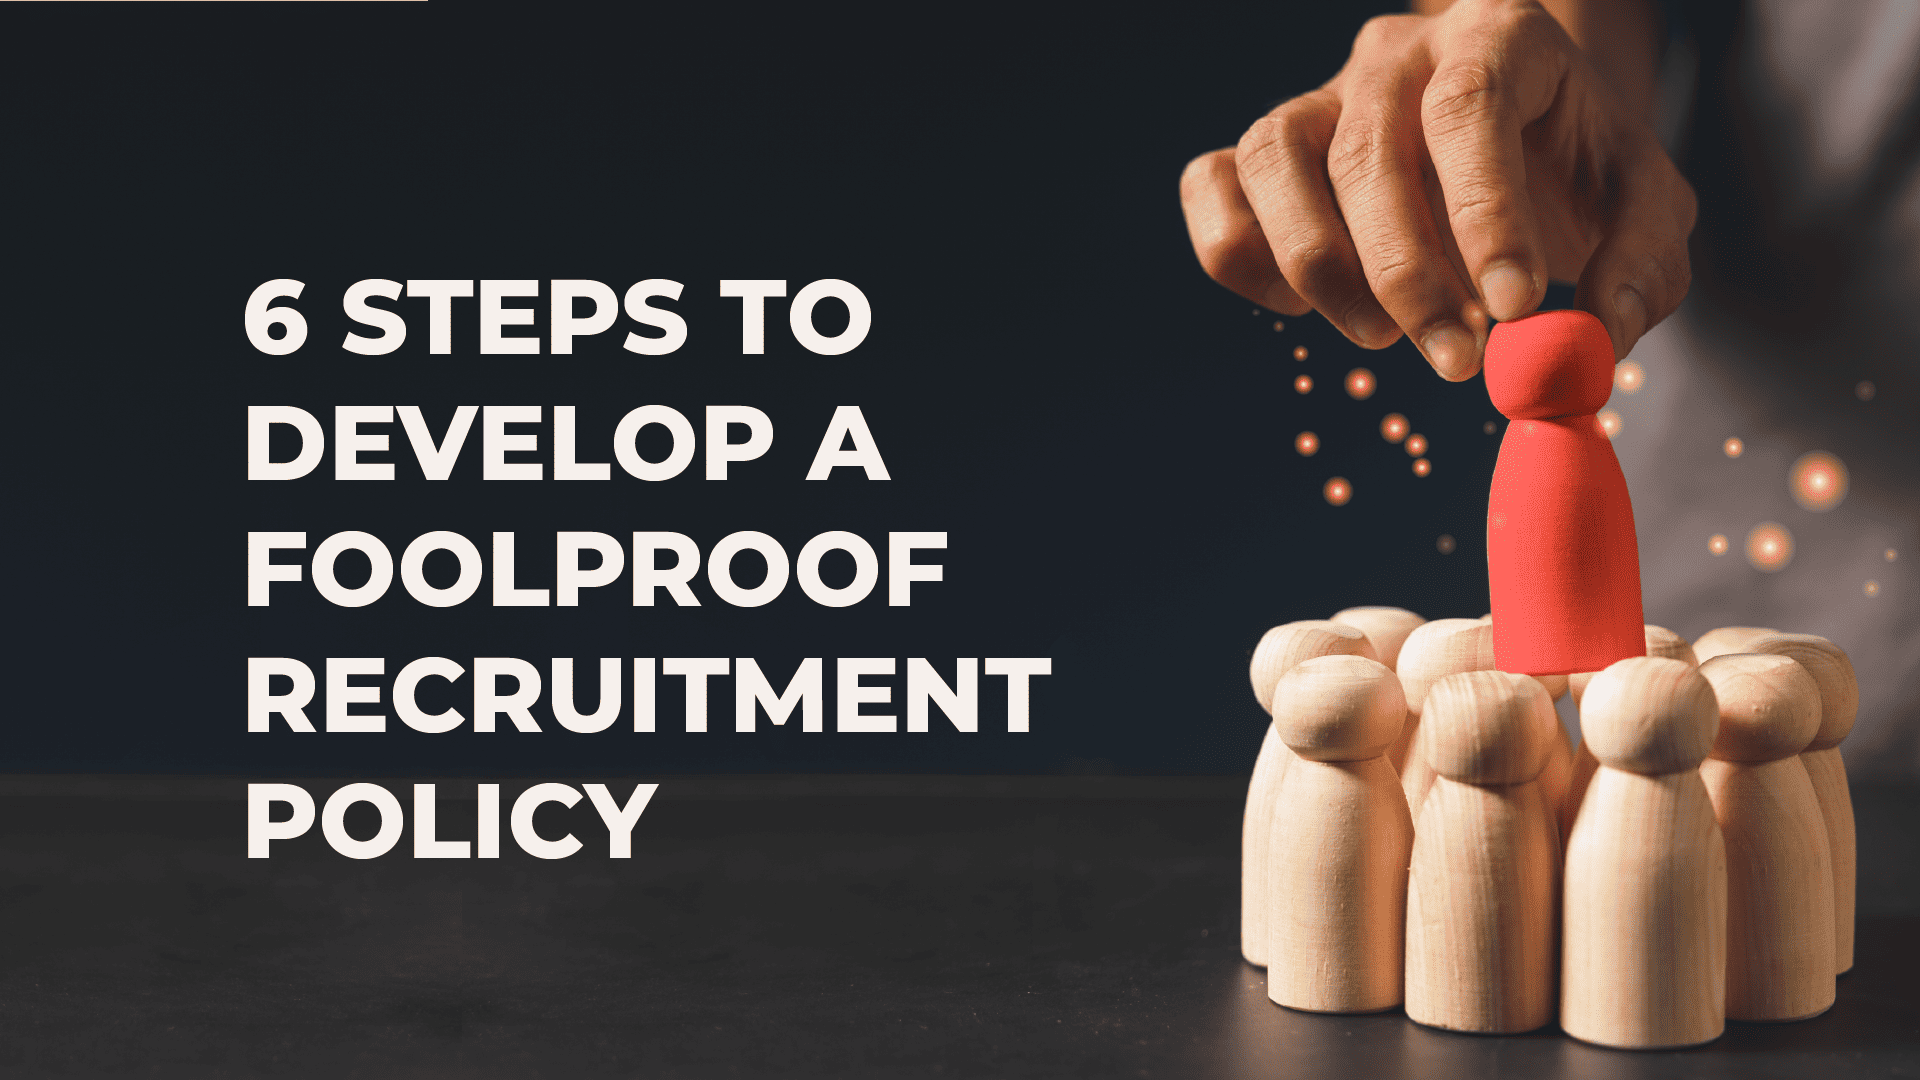 6 Steps to Develop a Foolproof Recruitment Policy